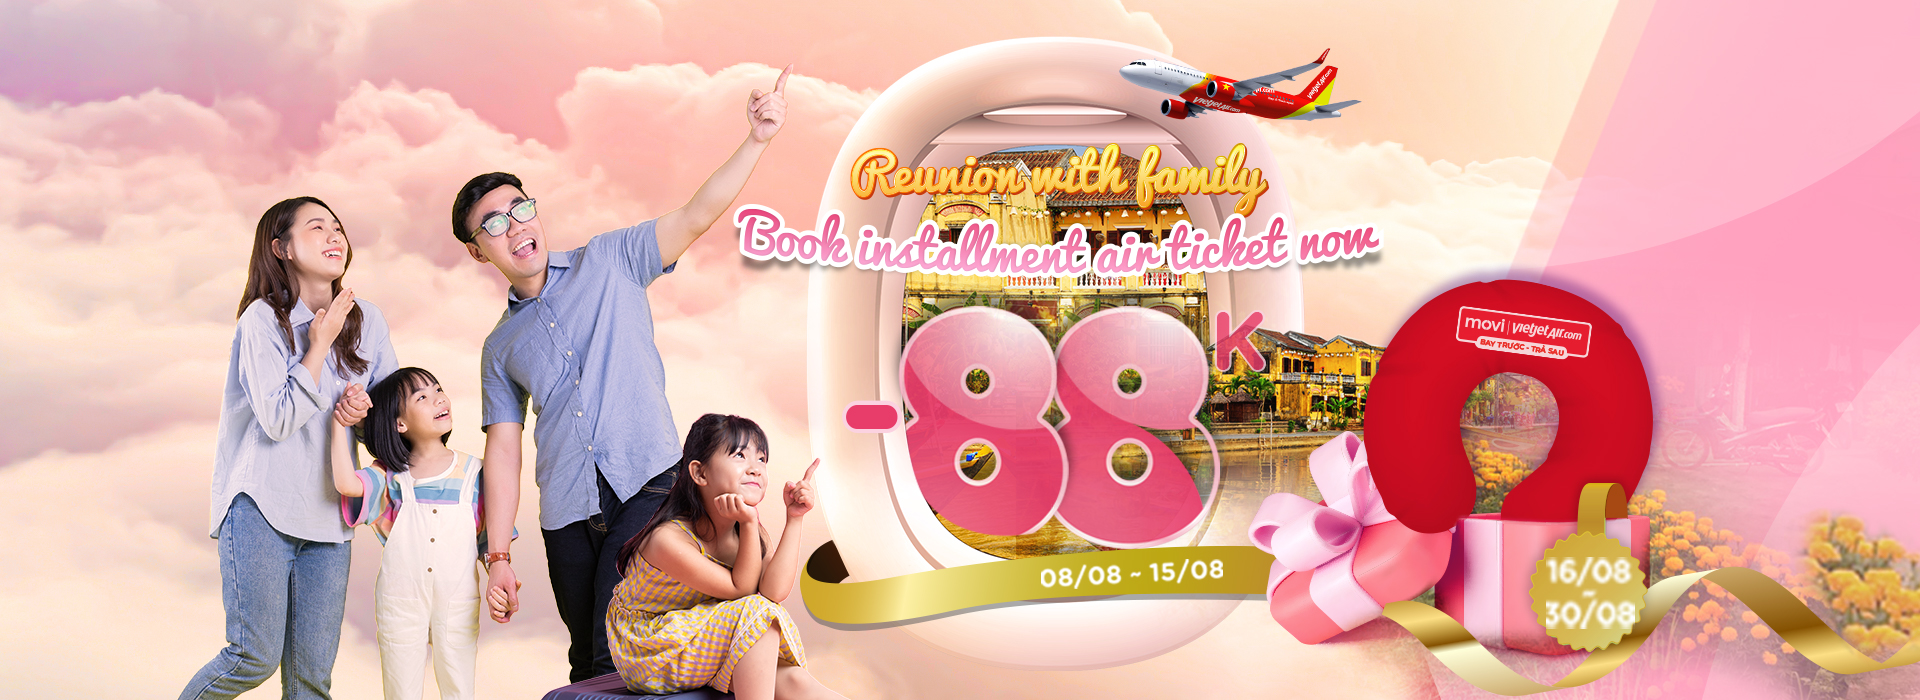 REUNION WITH FAMILY, BOOK INSTALLMENT AIR TICKET NOW